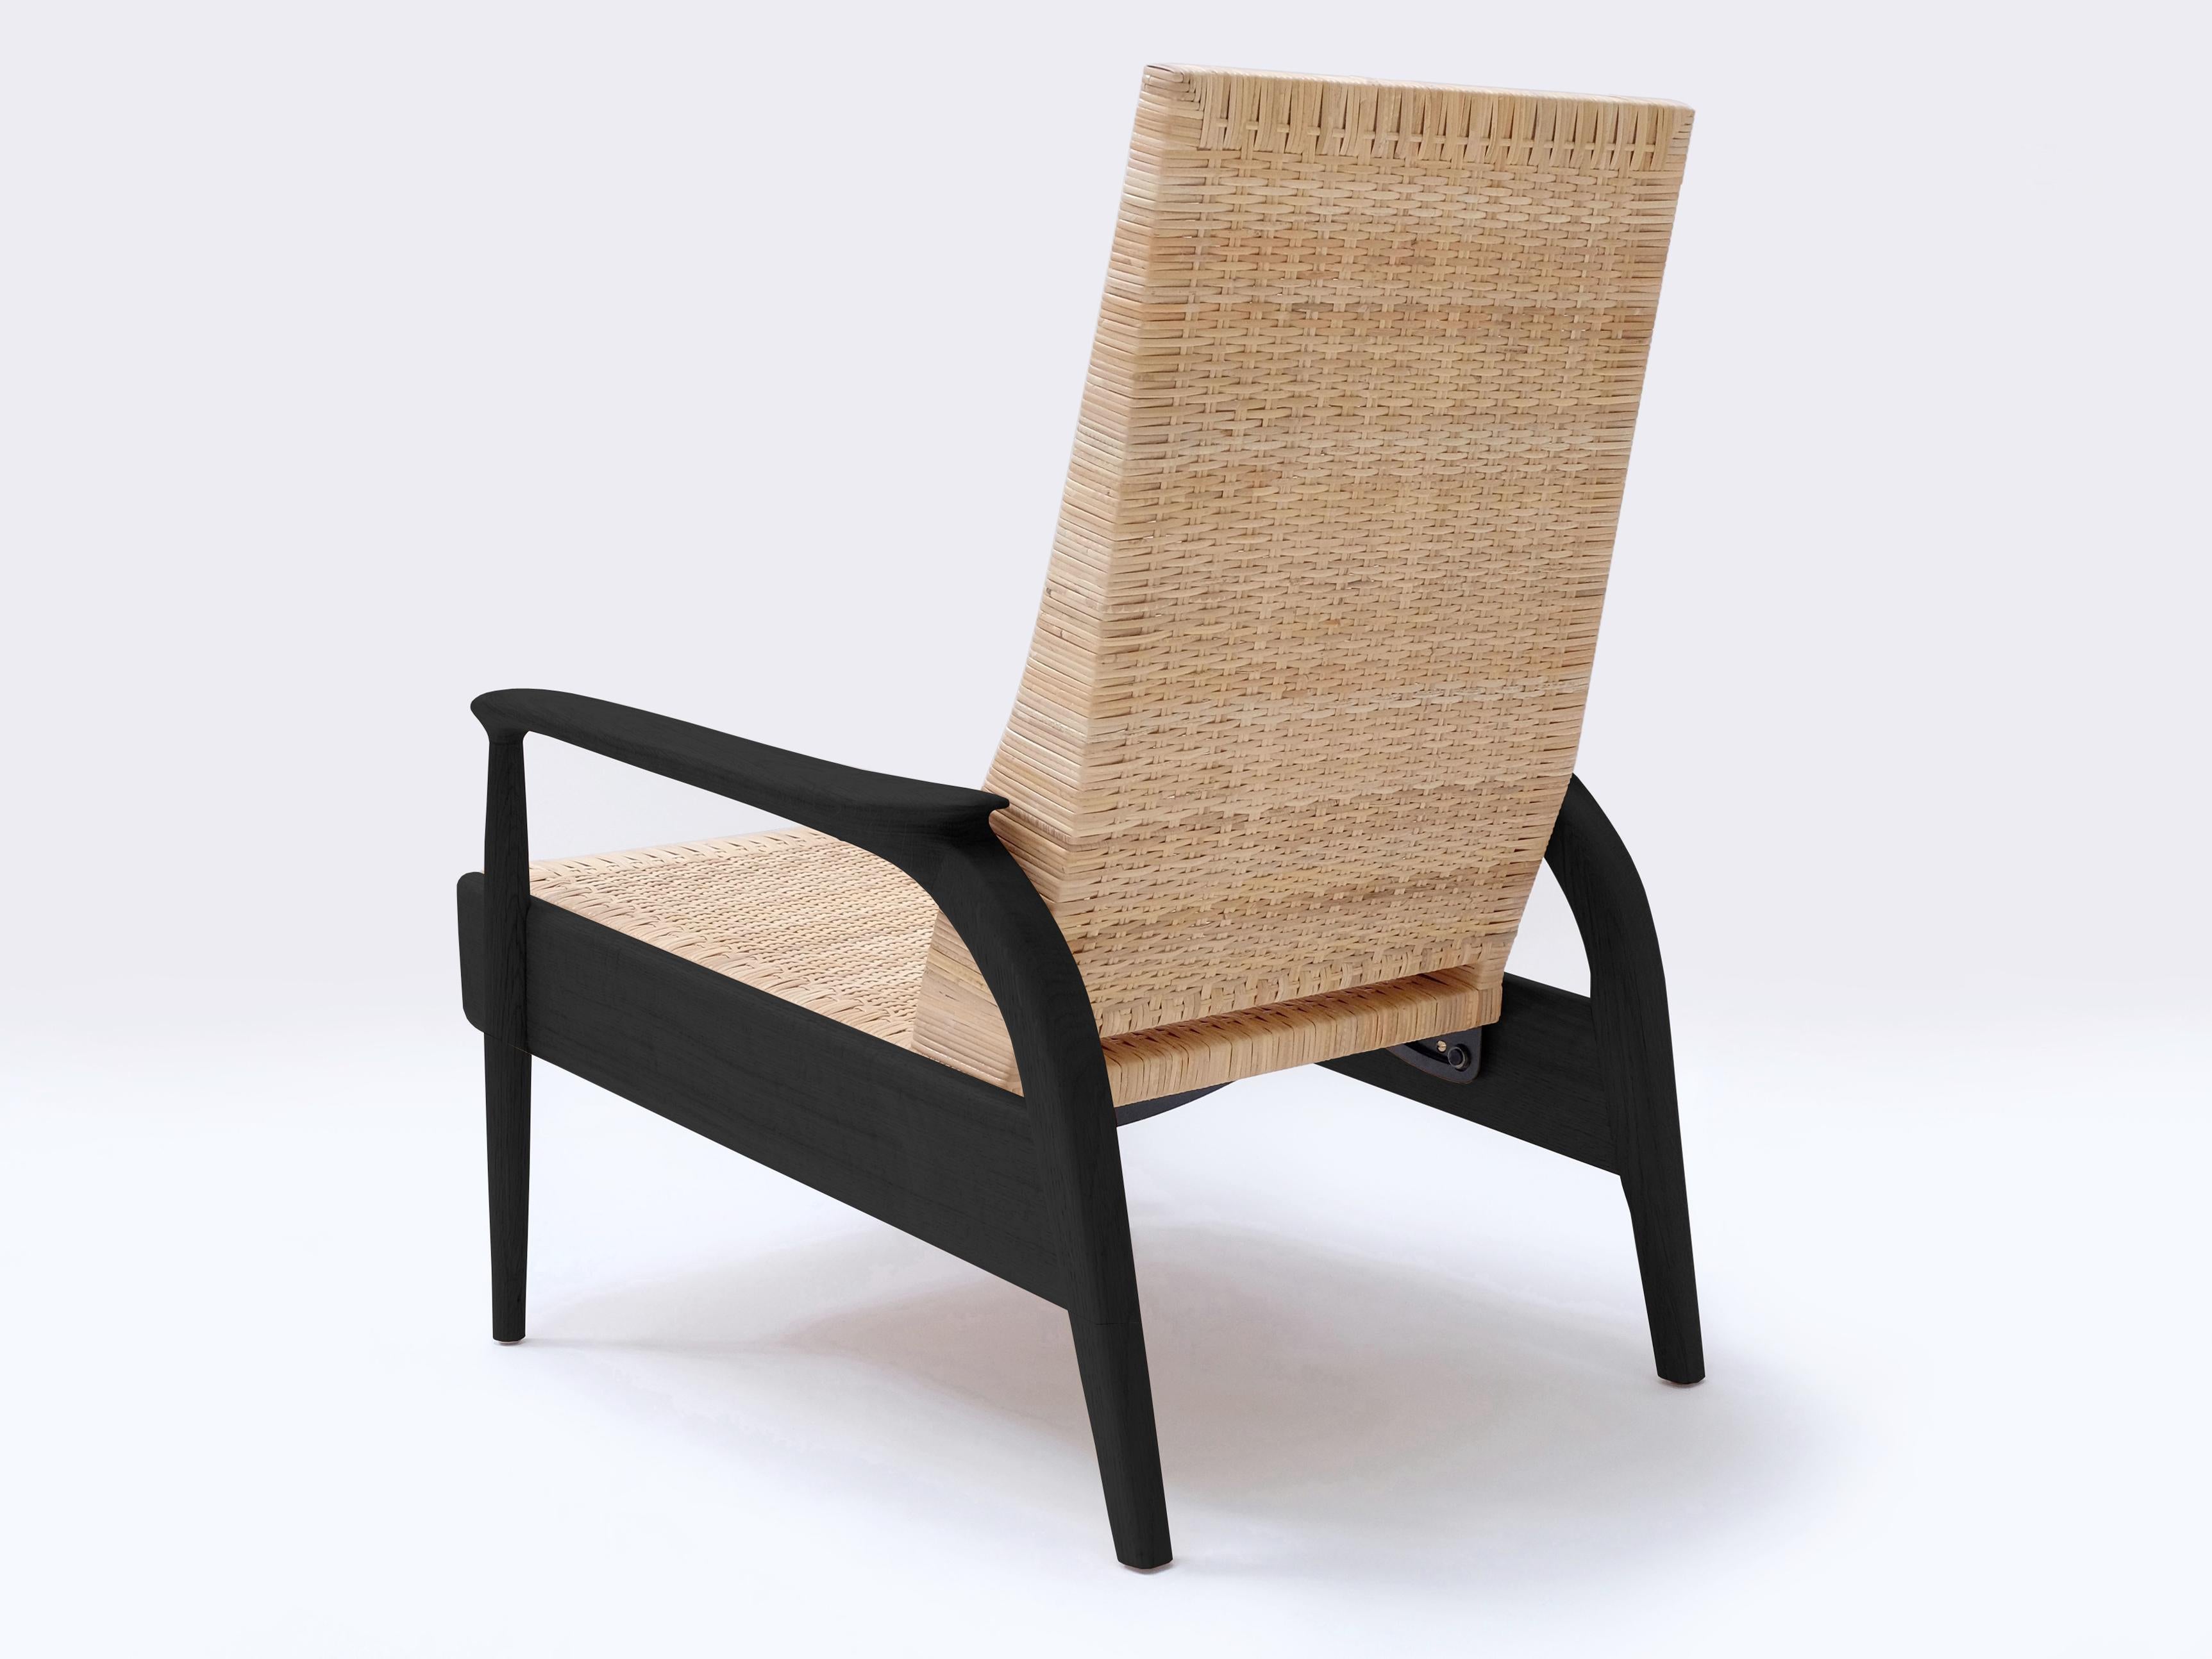 Hand-Woven Custom-made Lounge Chair, natural blackended Oak, Natural Cane, Leather Cushions For Sale